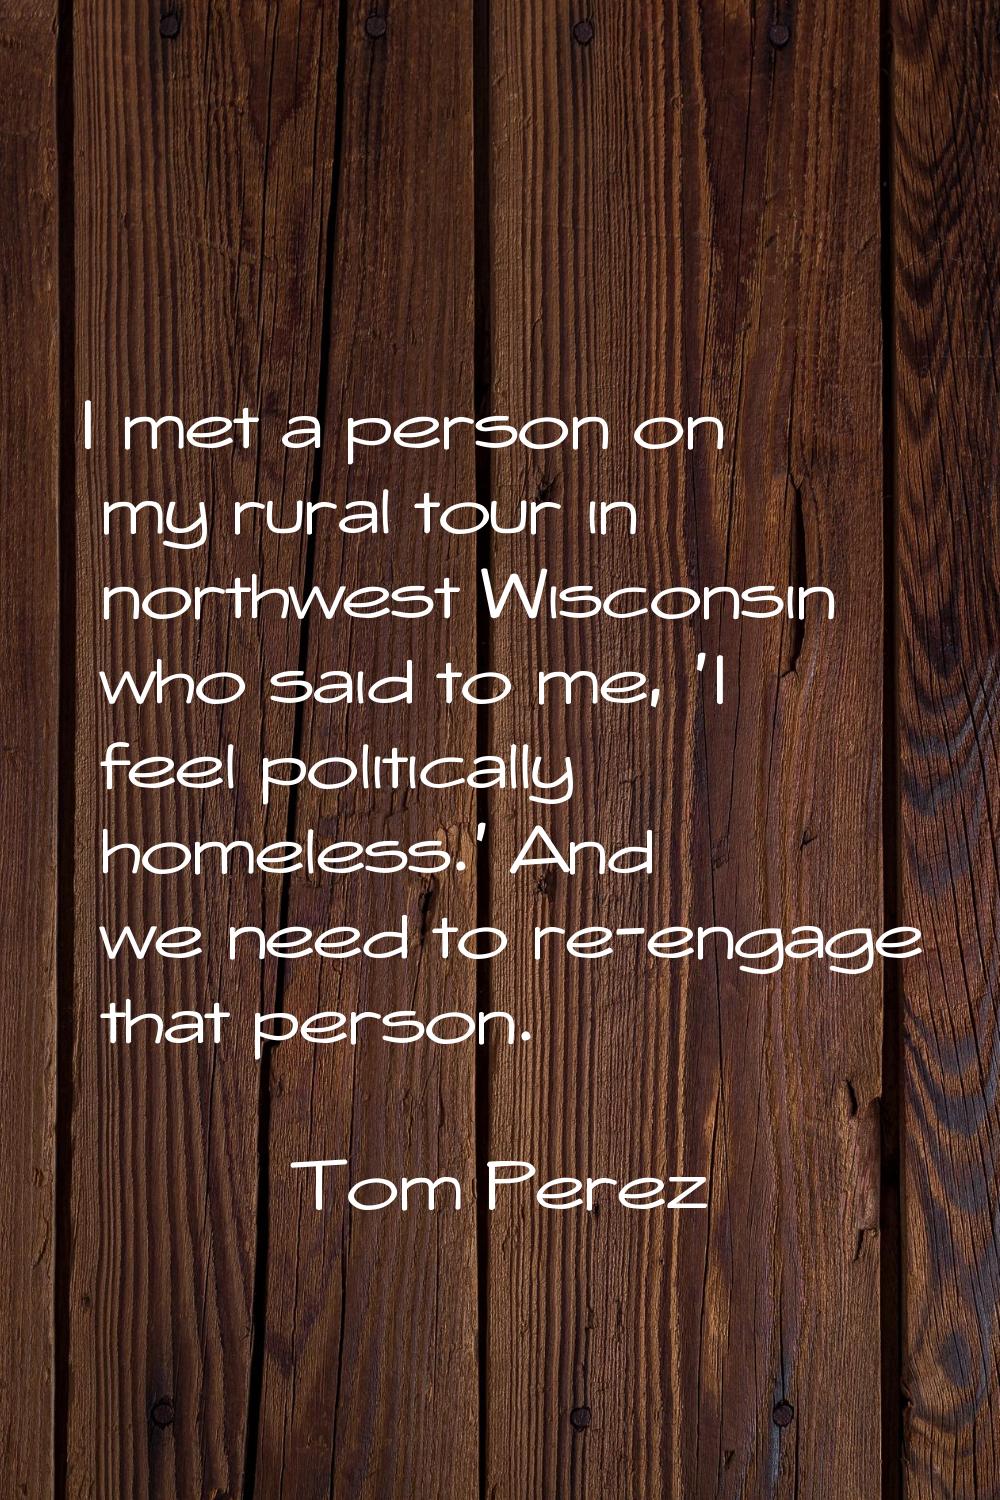 I met a person on my rural tour in northwest Wisconsin who said to me, 'I feel politically homeless